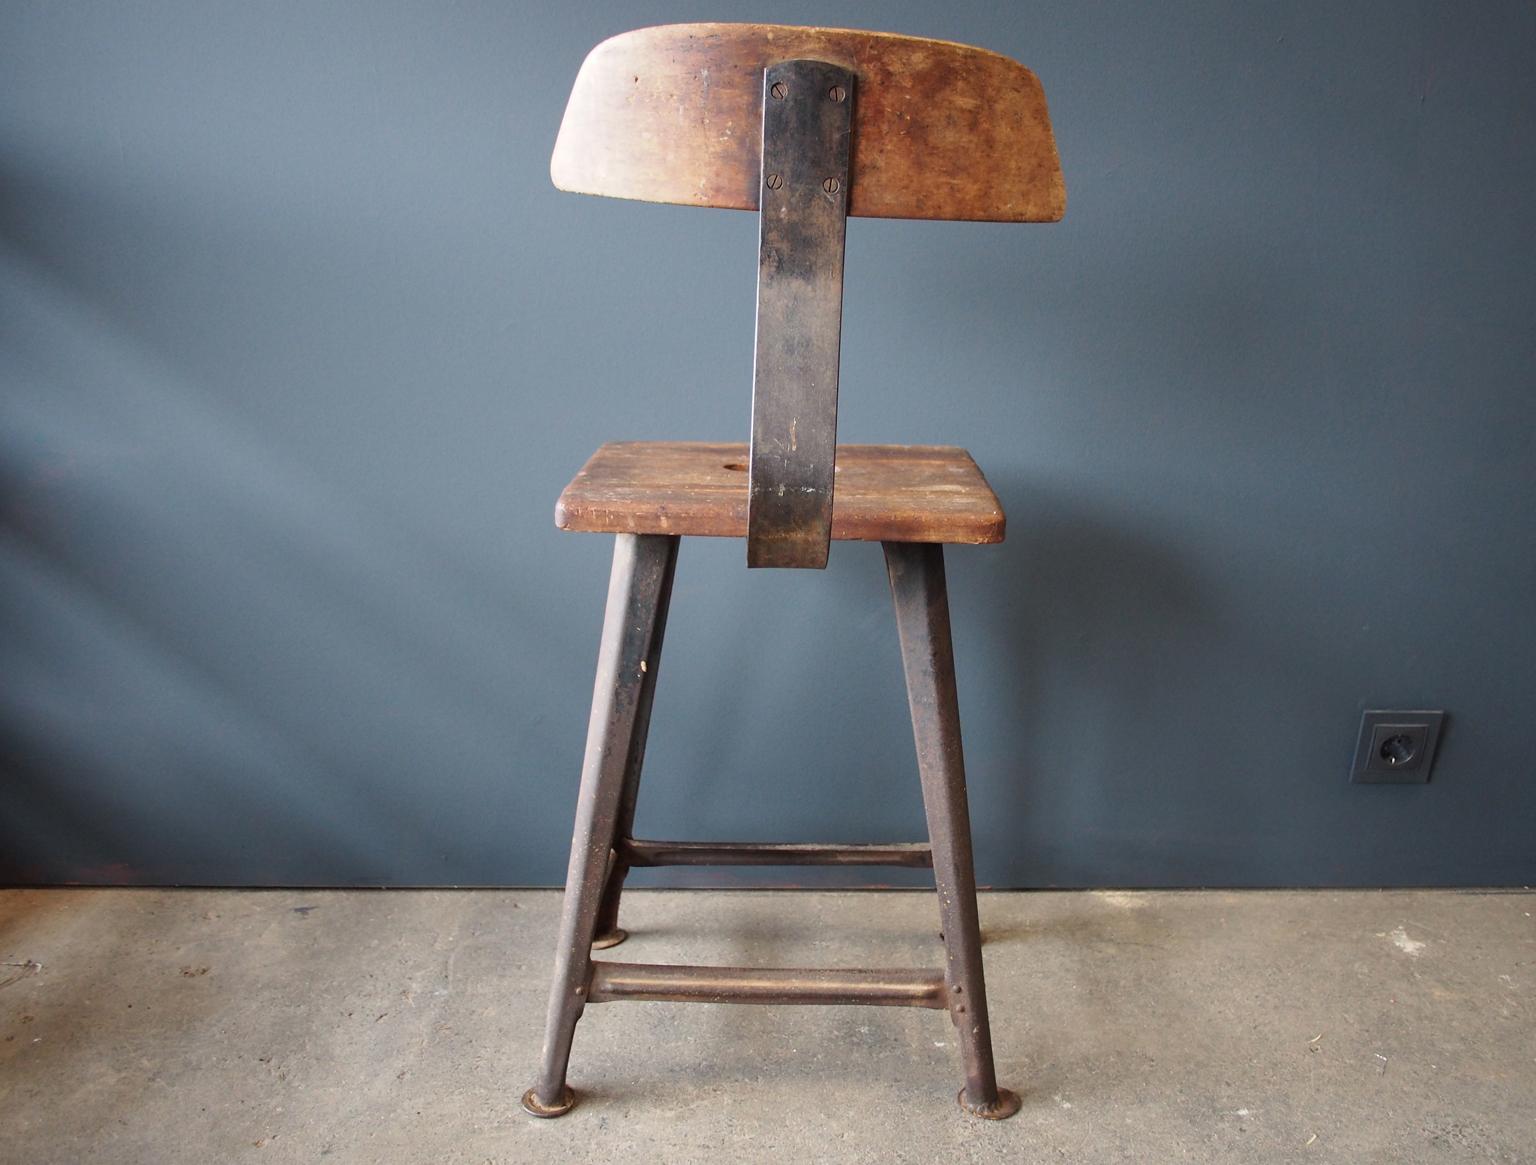 20th Century Industrial Stool or Chair by Rowac with Backrest, circa 1930